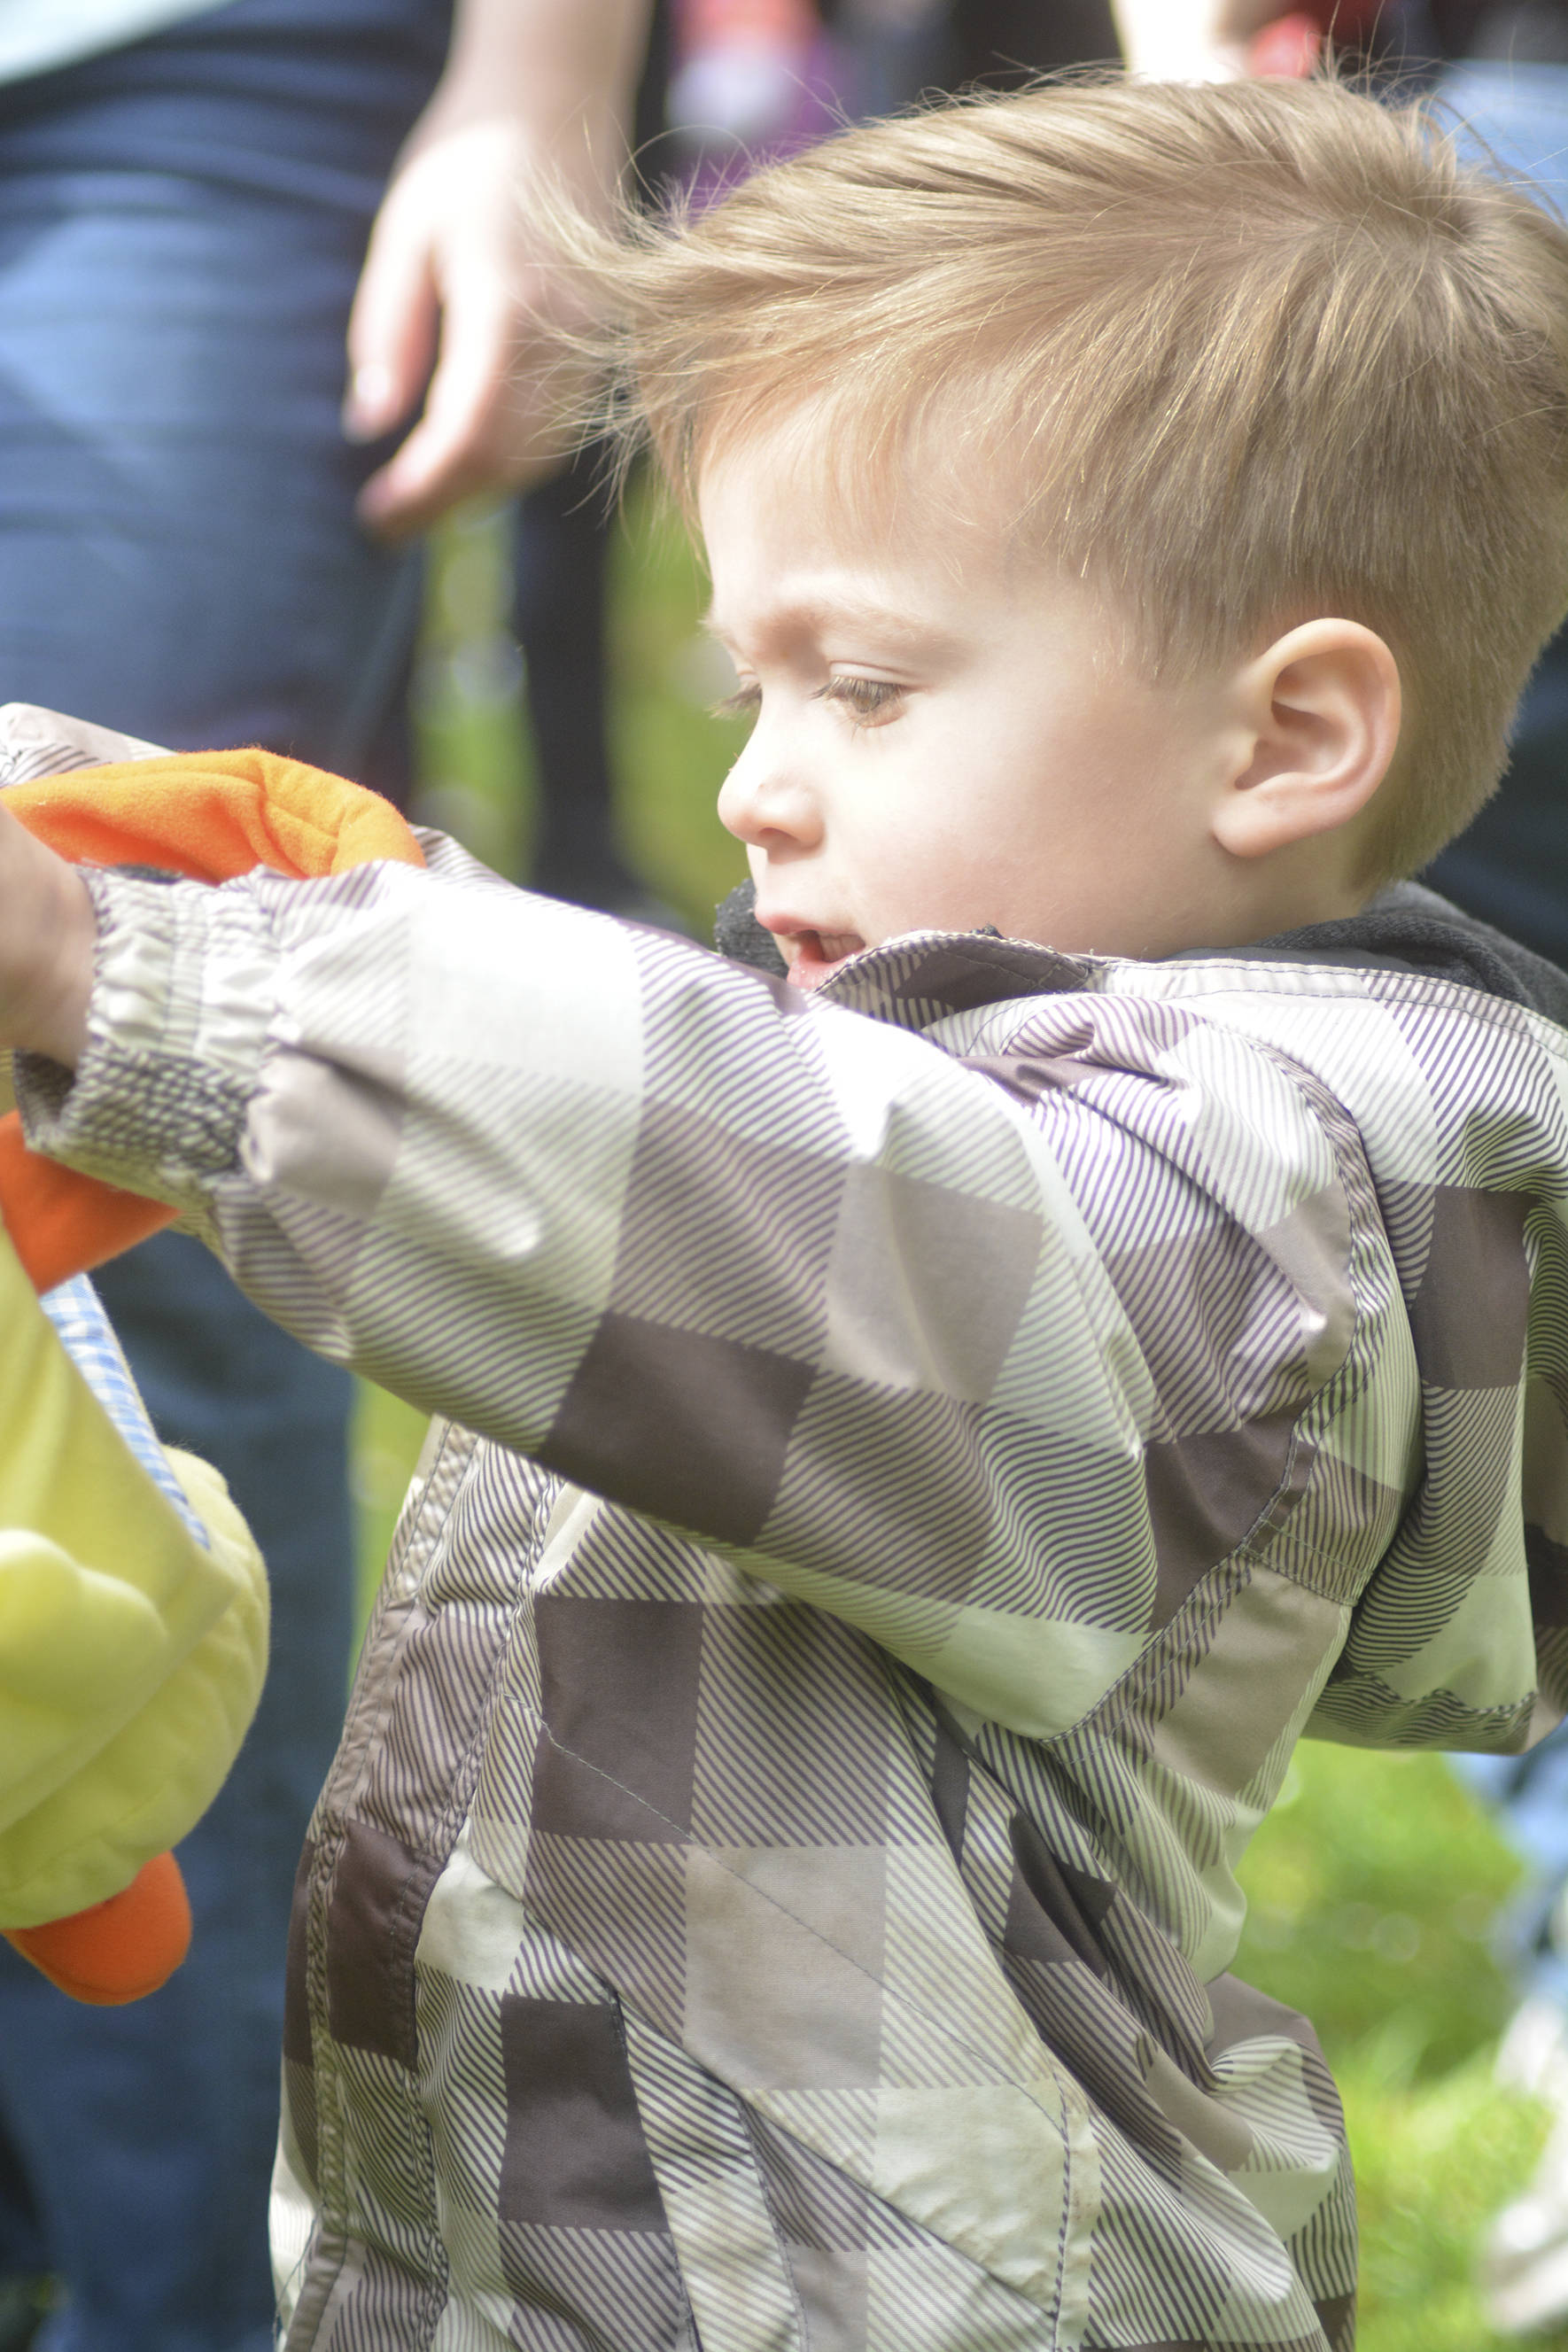 Cameron Hotchkiss explores his Easter basket to see what he found in the Easter egg hunt at Lake Wilderness Park. Photo by Kayse Angel